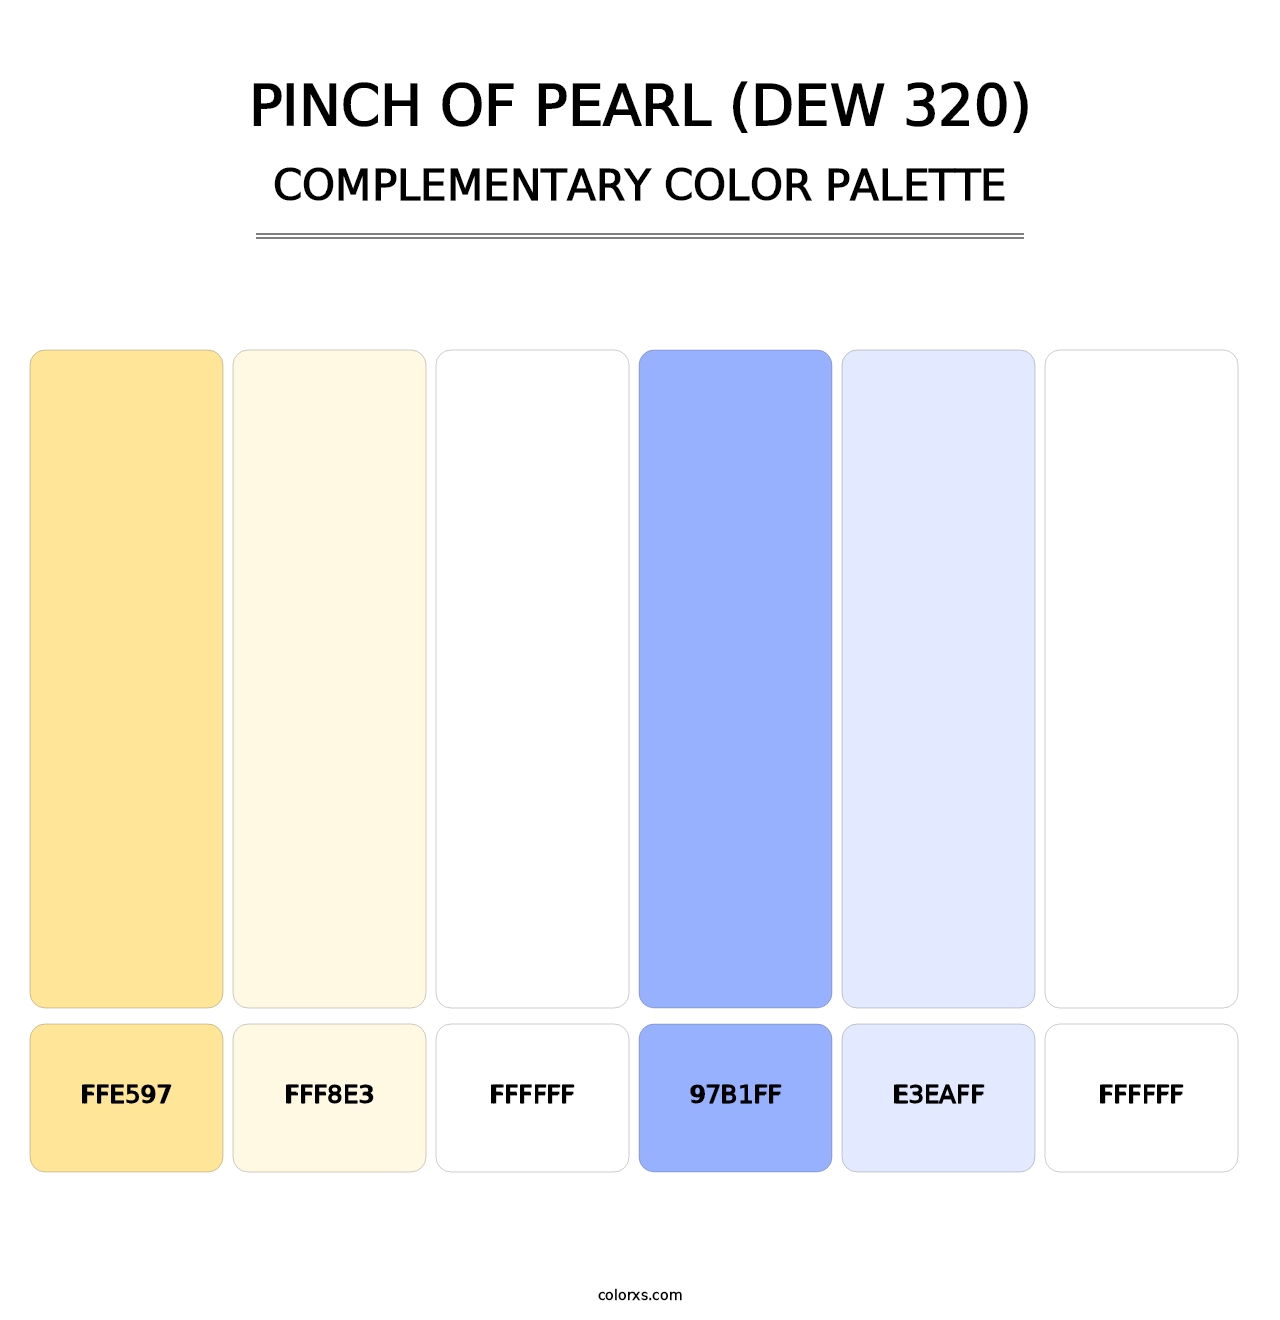 Pinch of Pearl (DEW 320) - Complementary Color Palette